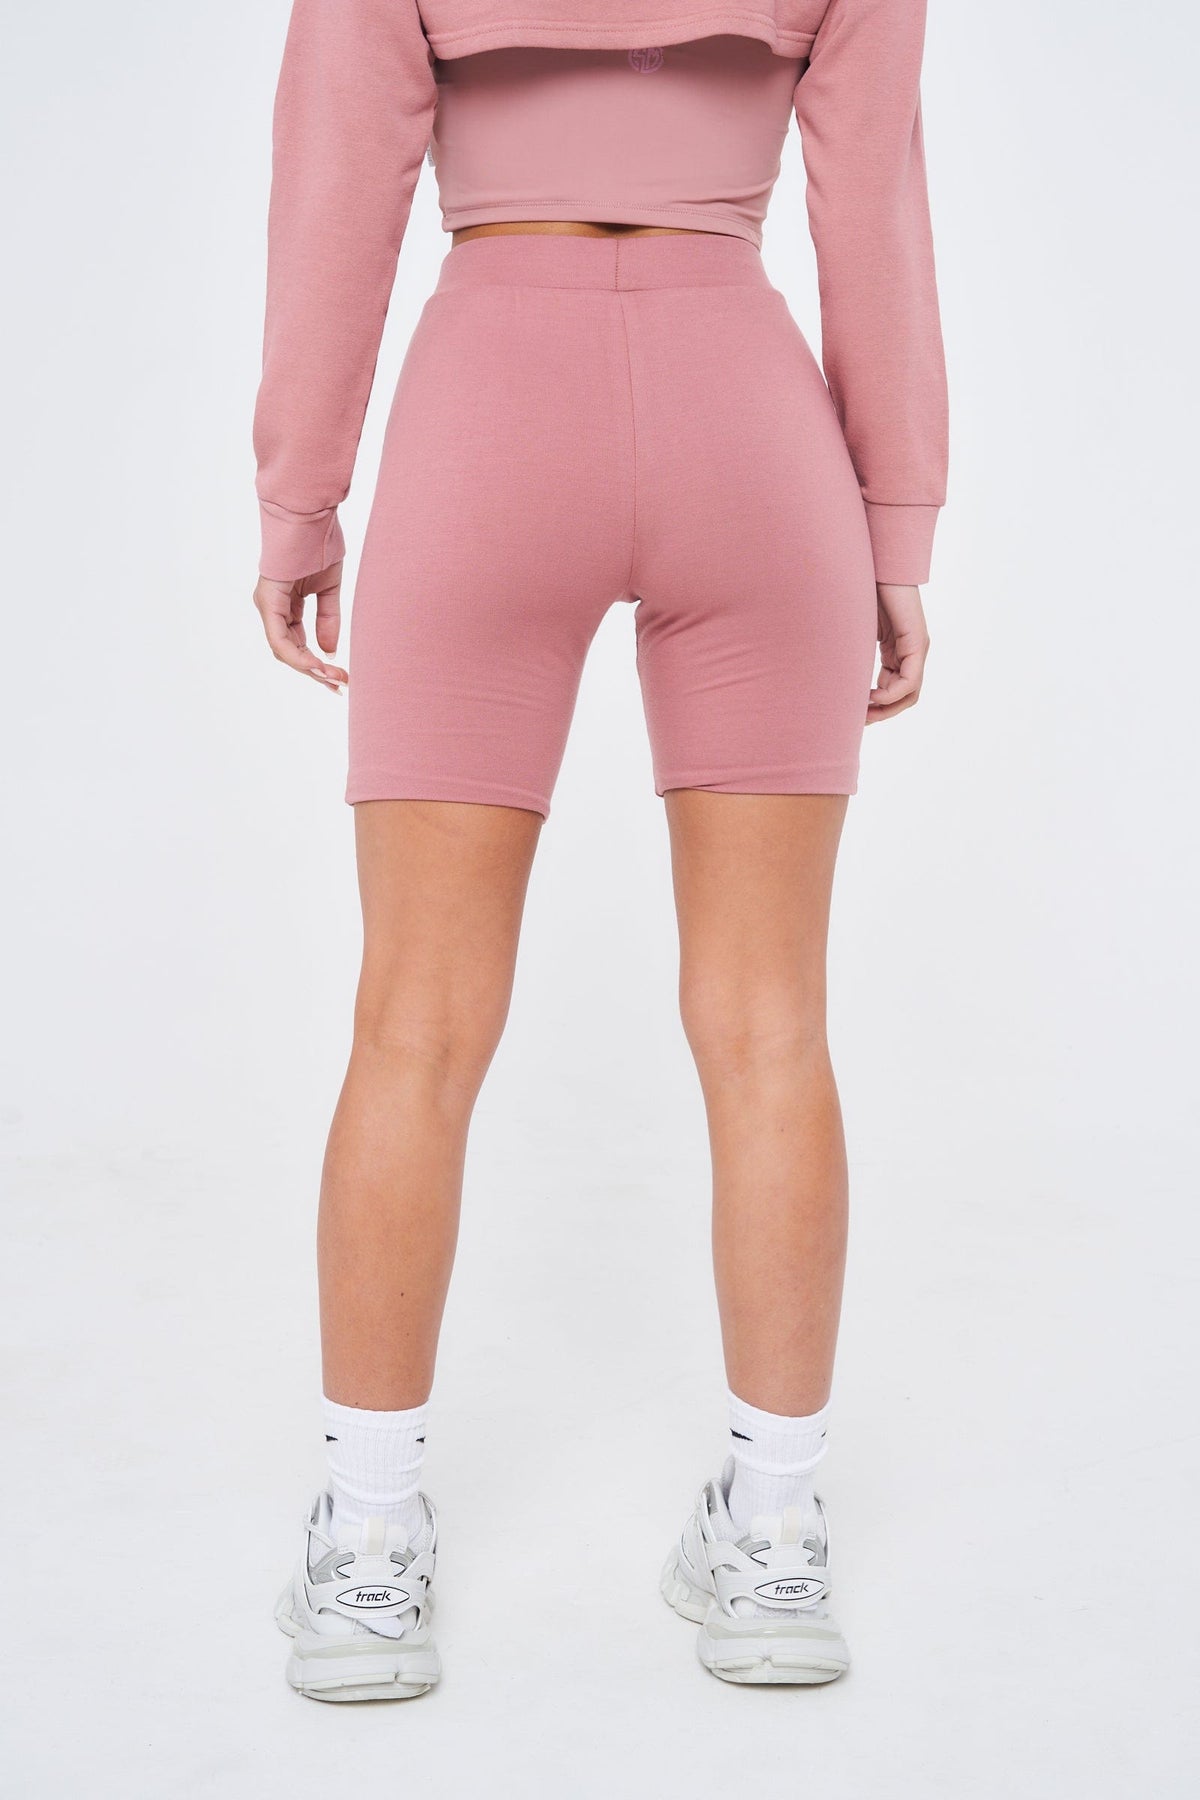 SIANMARIE Tonal Active Cycle Shorts - Misty Rose